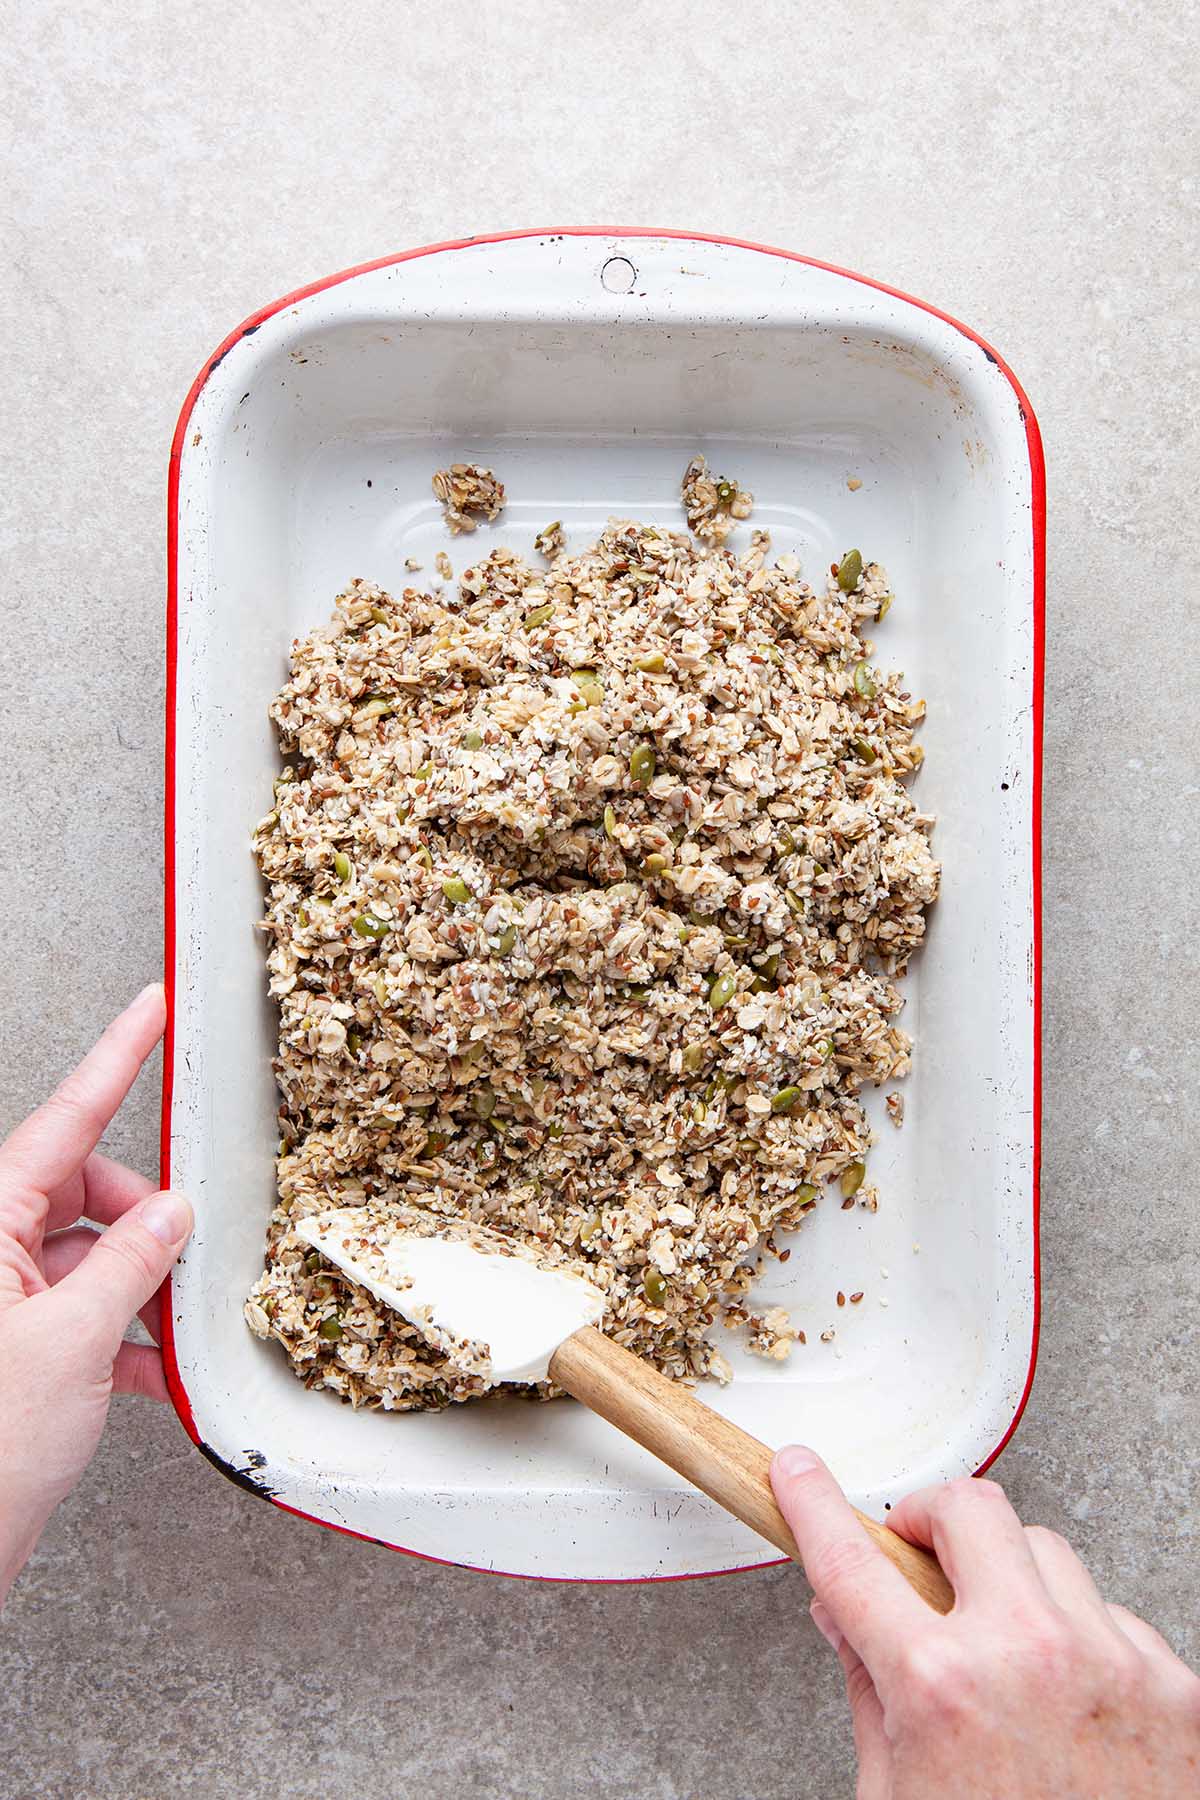 A hand smoothing unbaked granola in a baking dish.